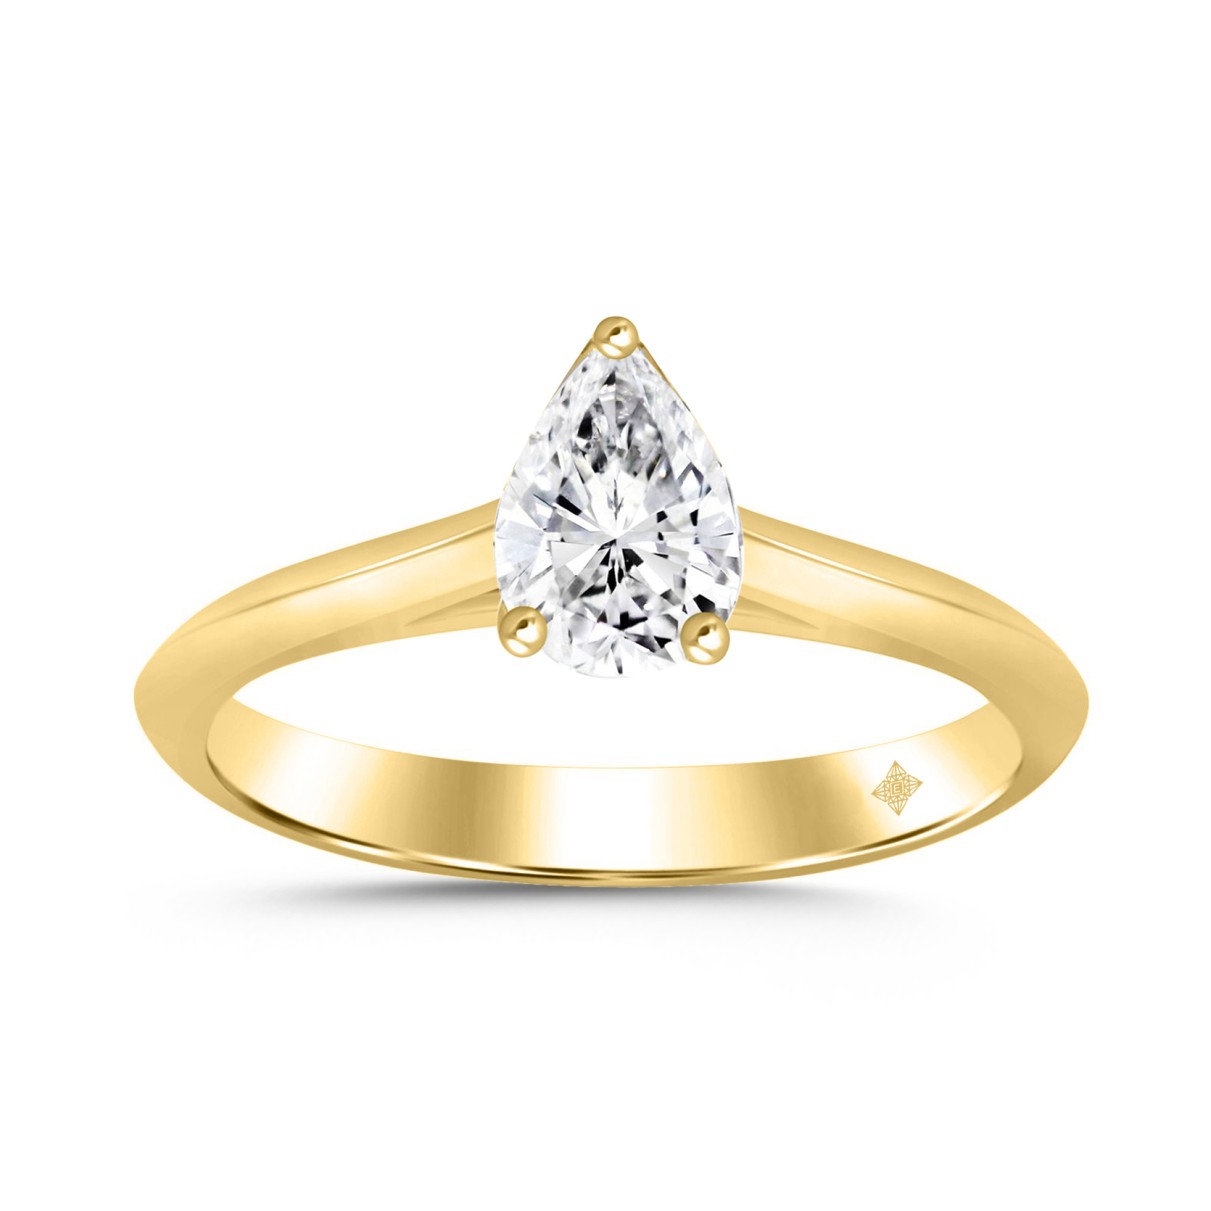 LADIES SOLITAIRE RING 4CT PEAR DIAMOND 14K YELLOW GOLD 